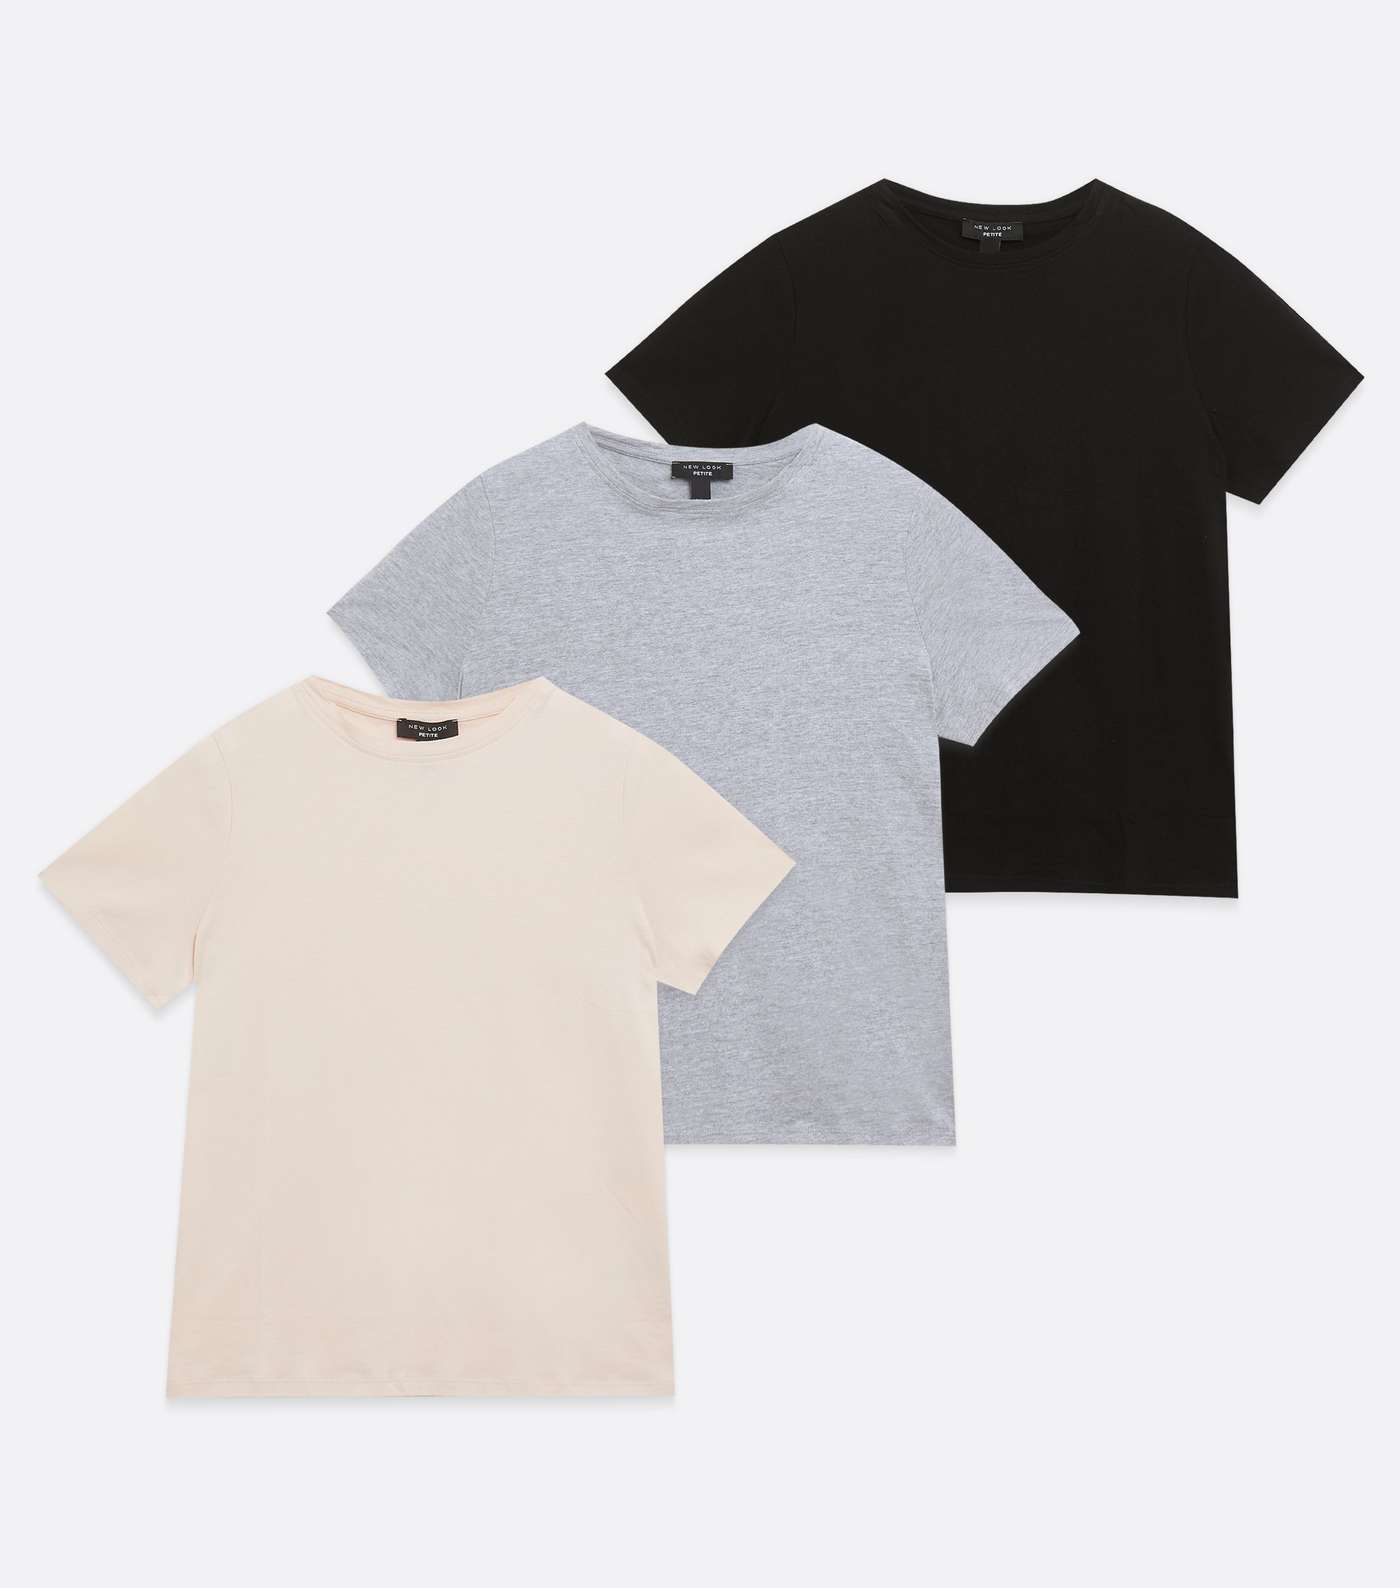 Petite 3 Pack Pale Pink Grey and Black T-Shirts Image 5